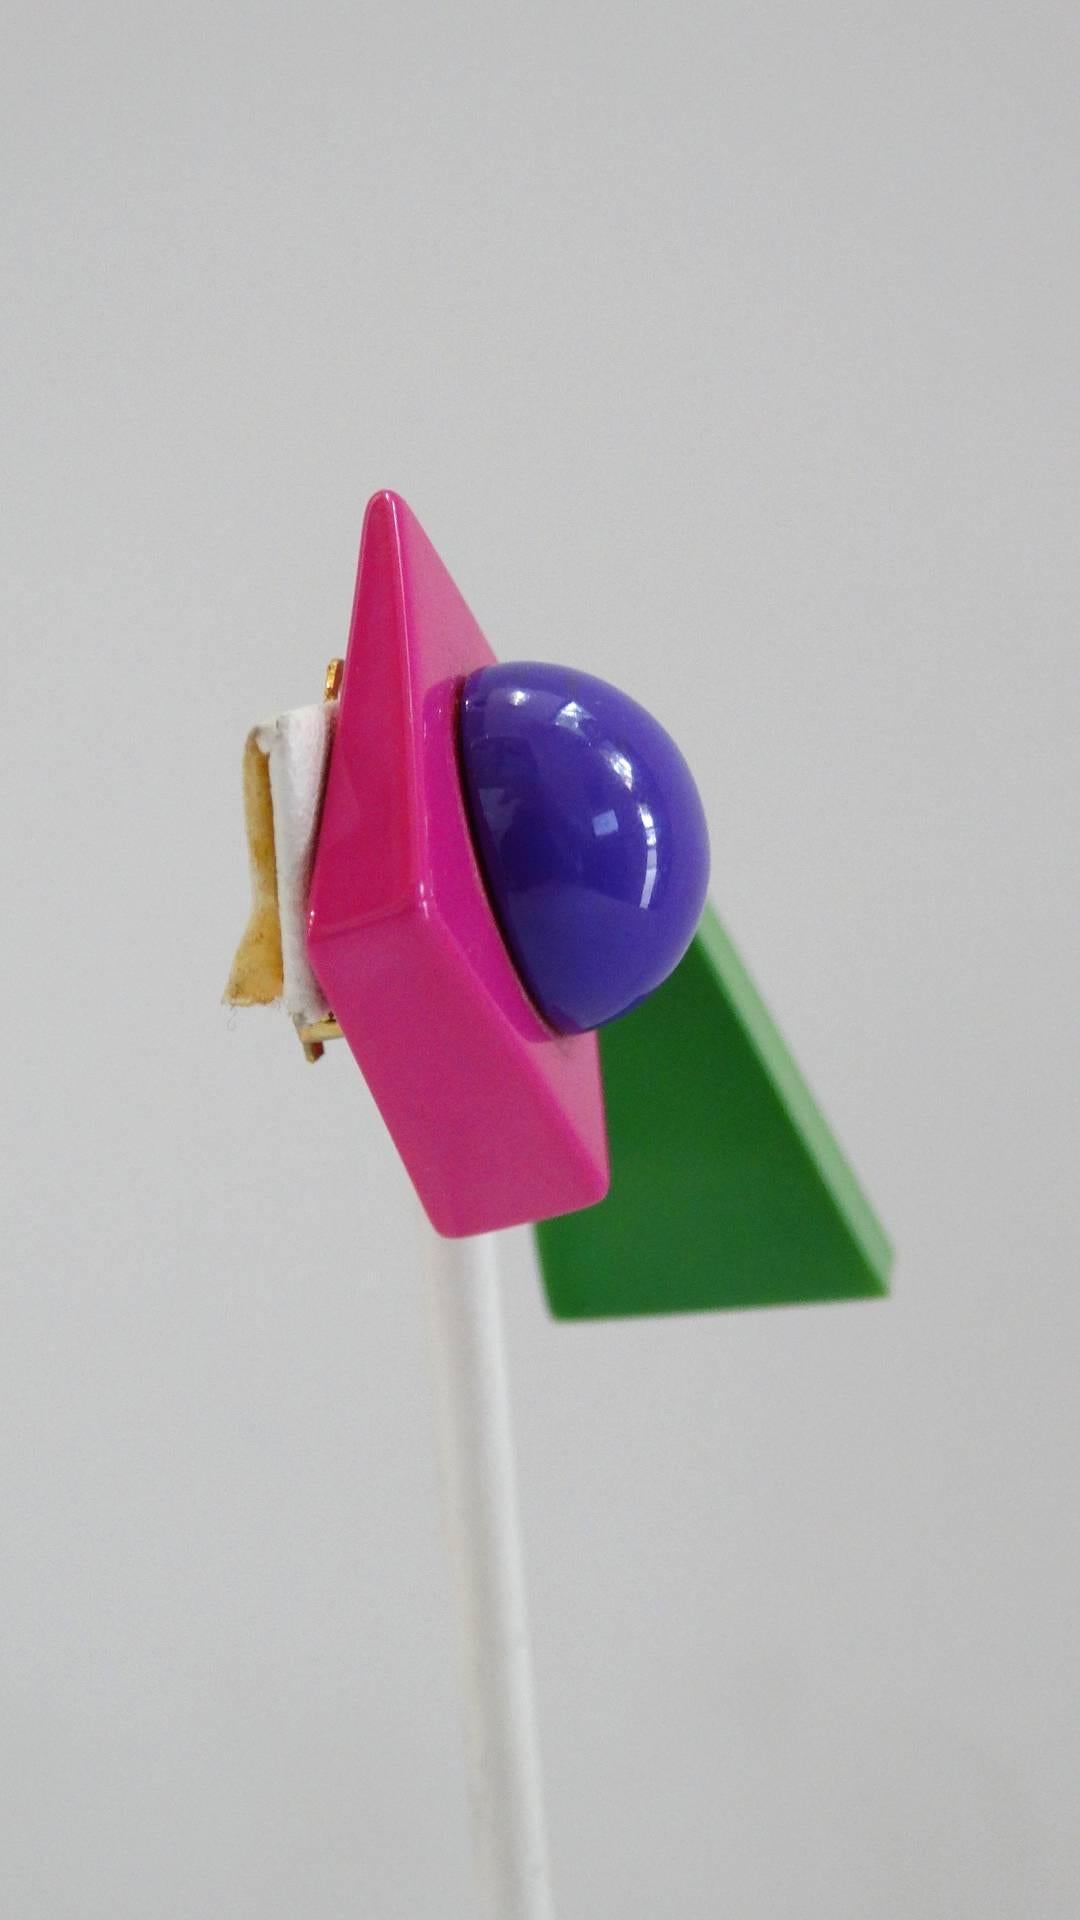 The most amazing pair of 1960s mismatched earrings designed by Francois Schoenlaub for Guillemette l'Hoir Paris! Made of a bold and bright French bakelite material, in shades of violet, magenta and green! These earrings are delightfully mismatched-